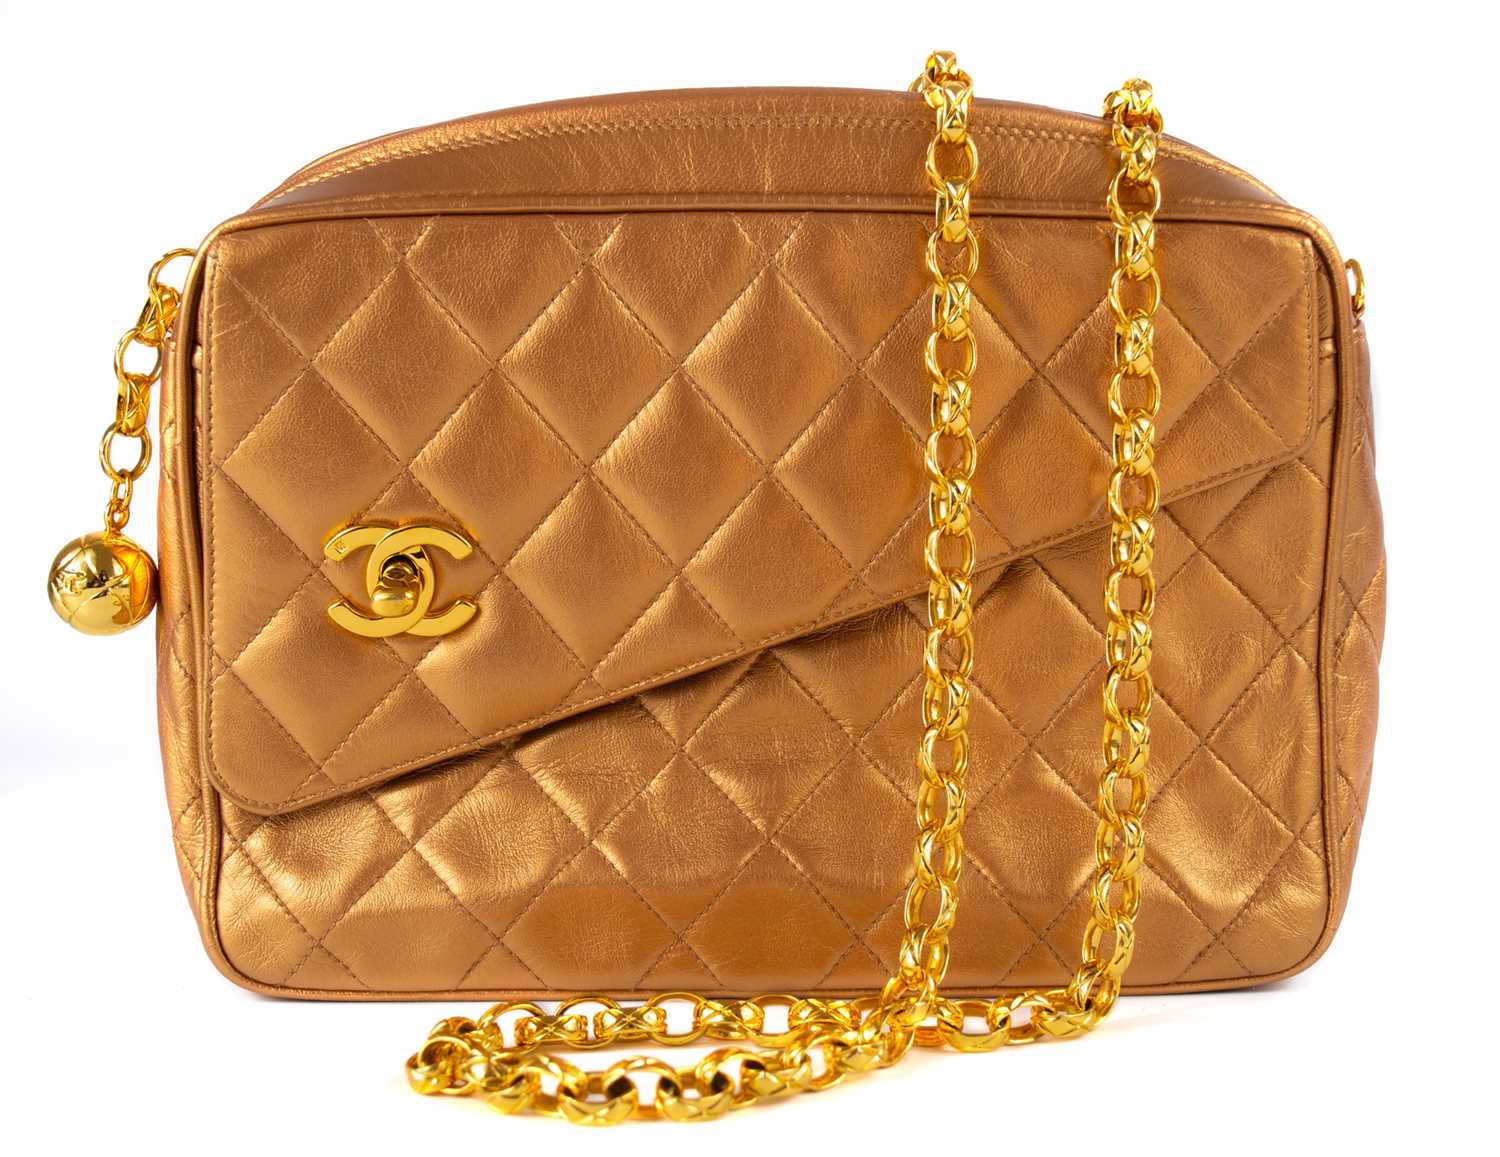 A Chanel gold quilted leather turn lock camera bag.